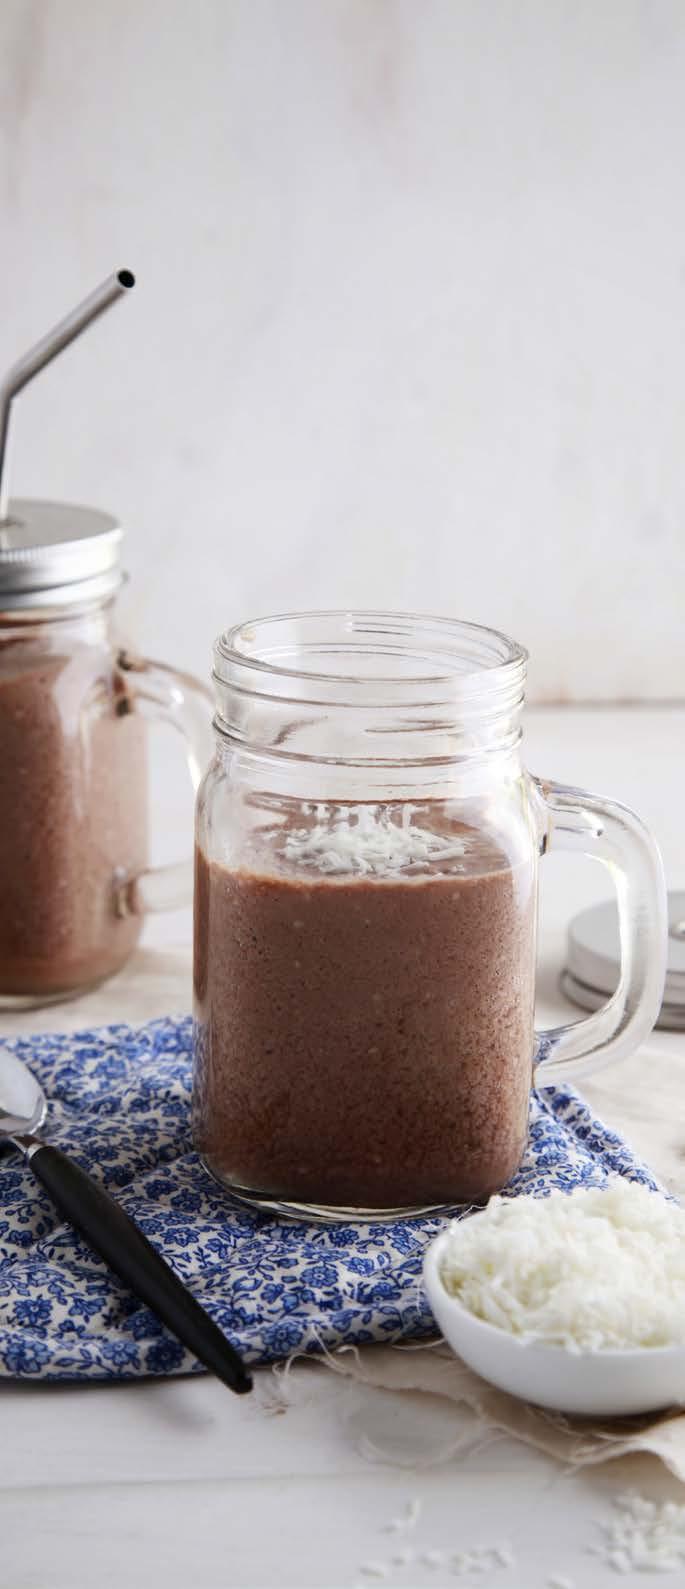 CHOCOLATE SMOOTHIES Hot Coconut Chocolate SERVES 1 CALORIES PER SERVE: 316 (1329KJ) NUTRITIONAL INFO: PROTEIN: 24.4G FIBRE: 8.7G TOTAL FAT: 11.1G SATURATED FAT: 8.3G CARBOHYDRATES: 29.